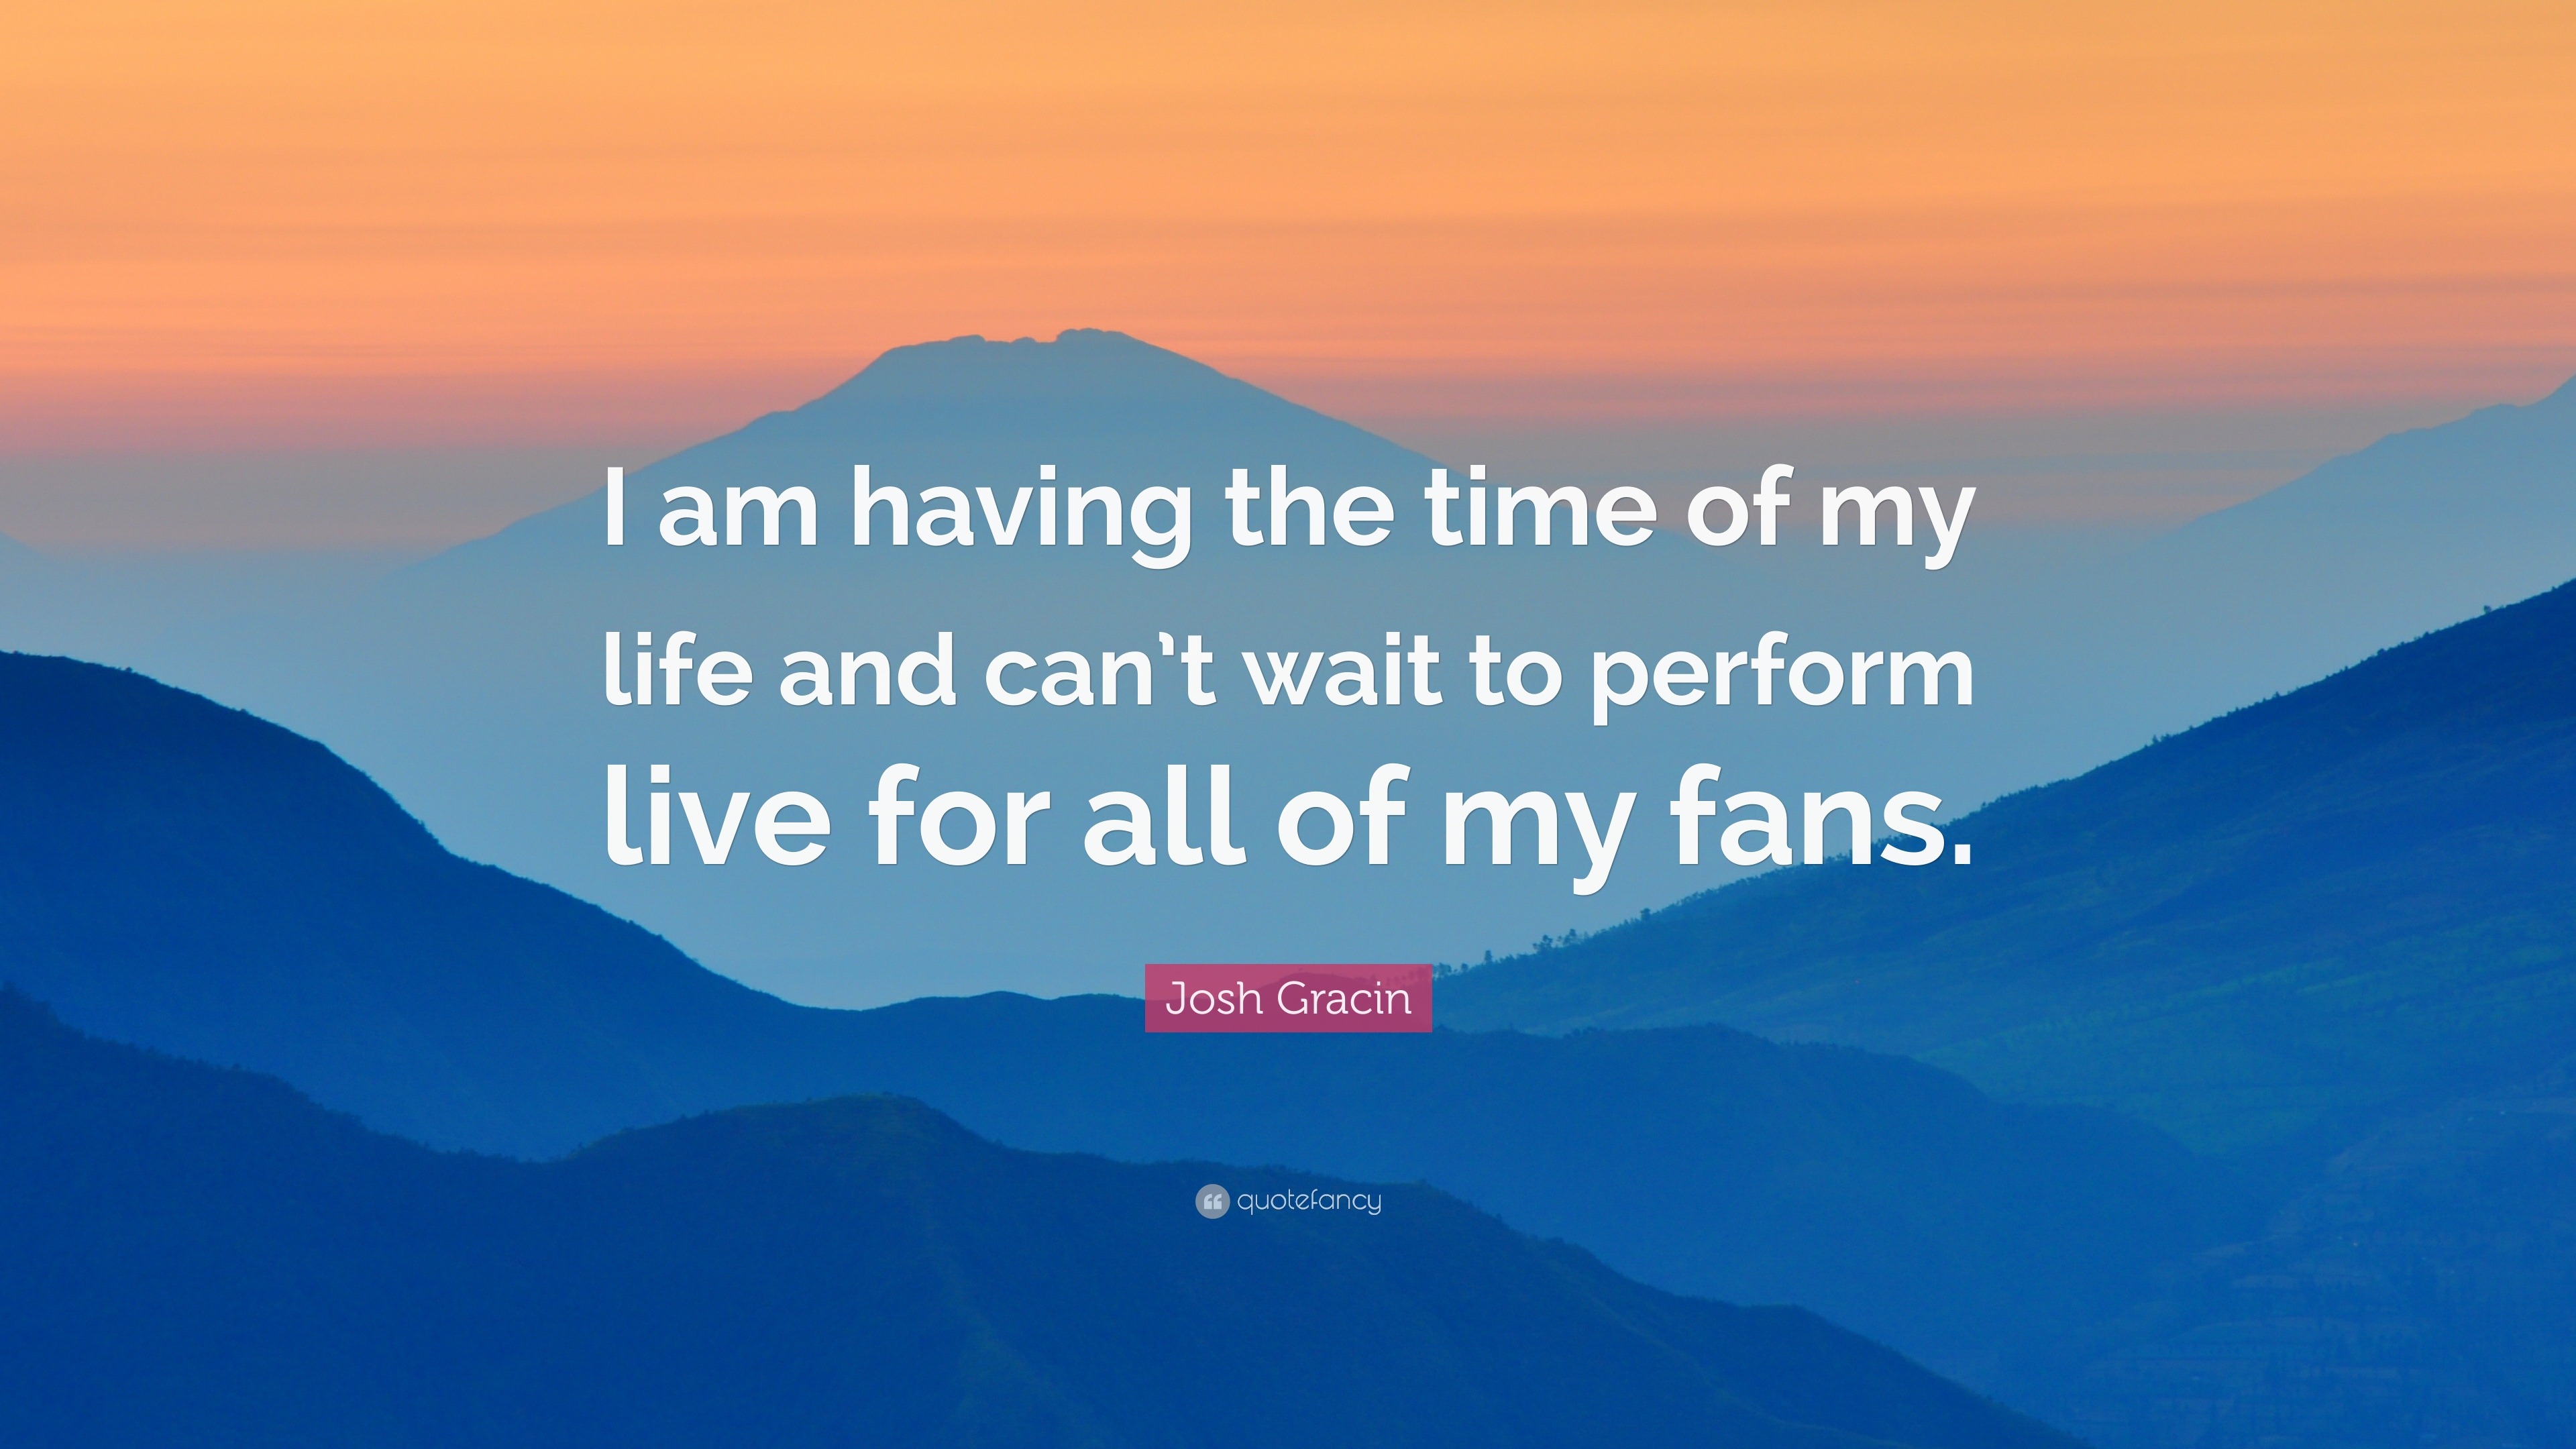 Josh Gracin Quote “I am having the time of my life and can